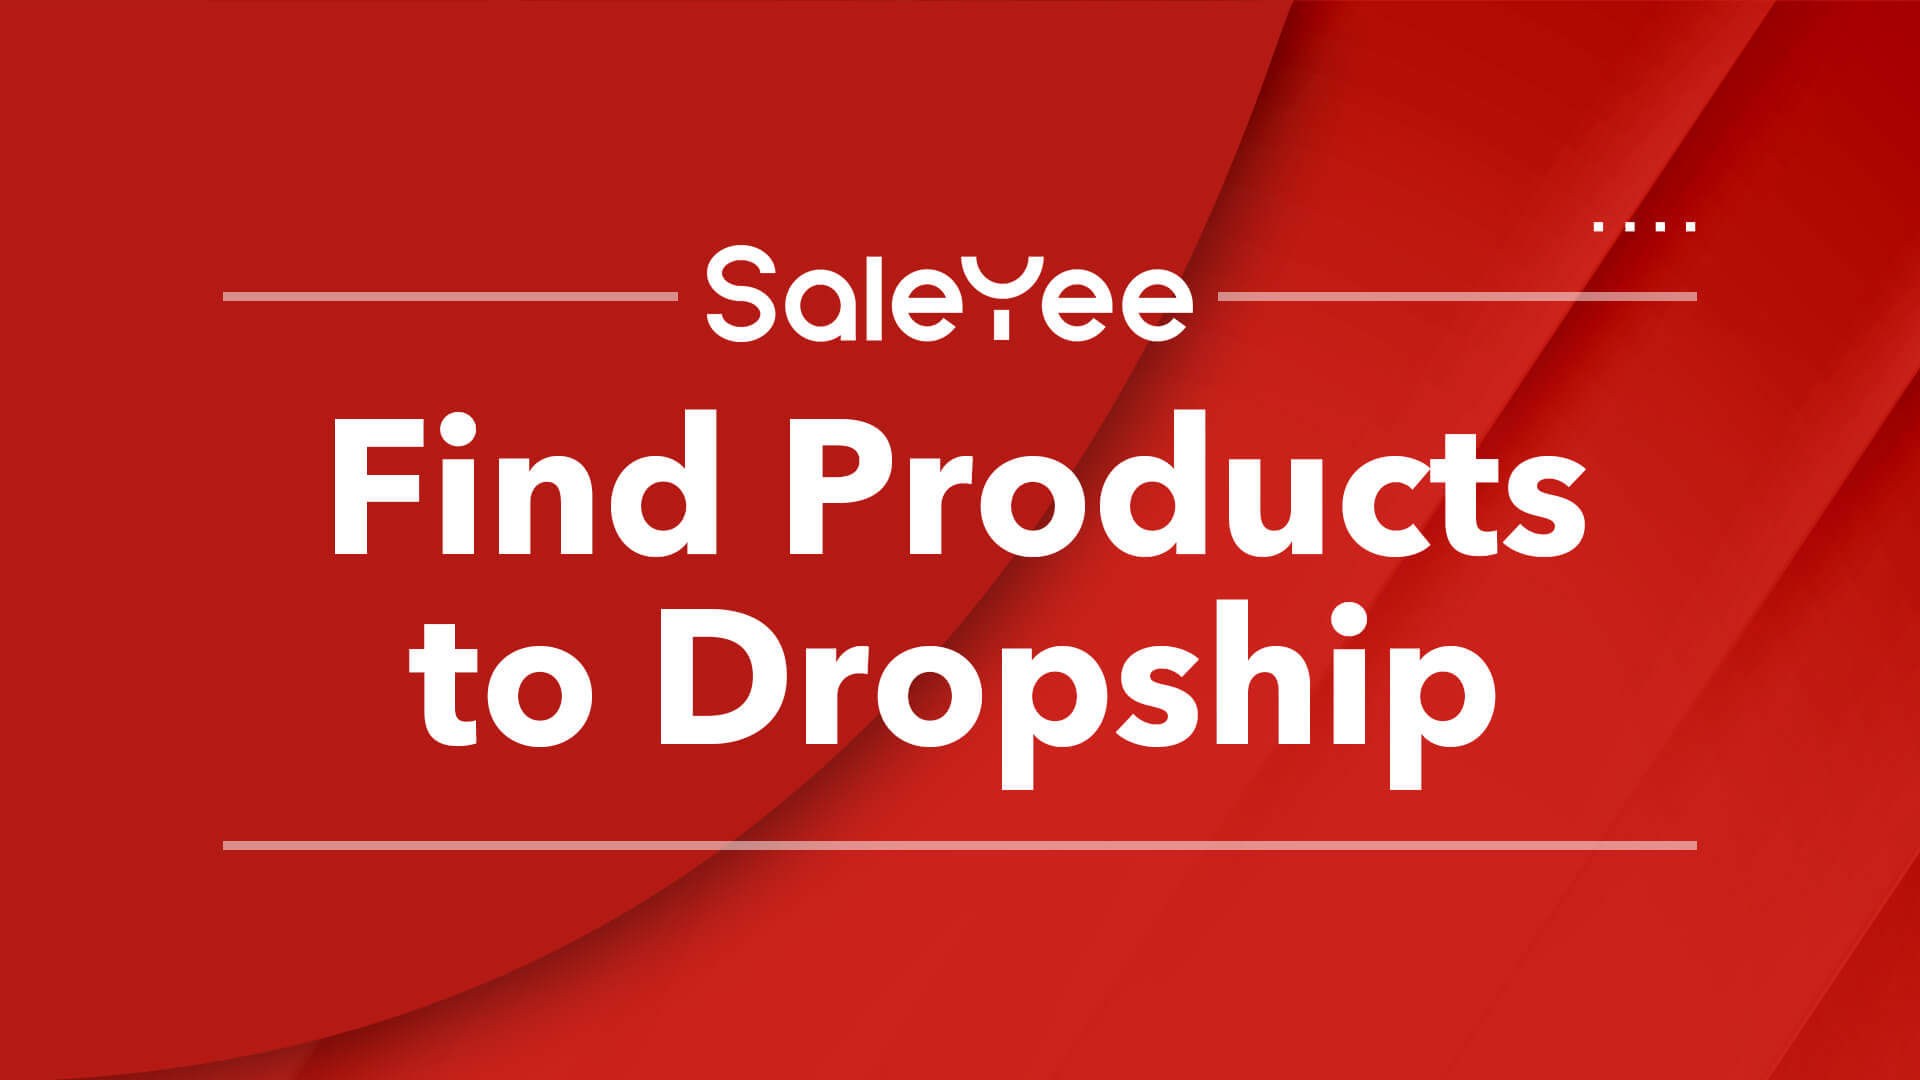 1. How to Find Products to Dropship